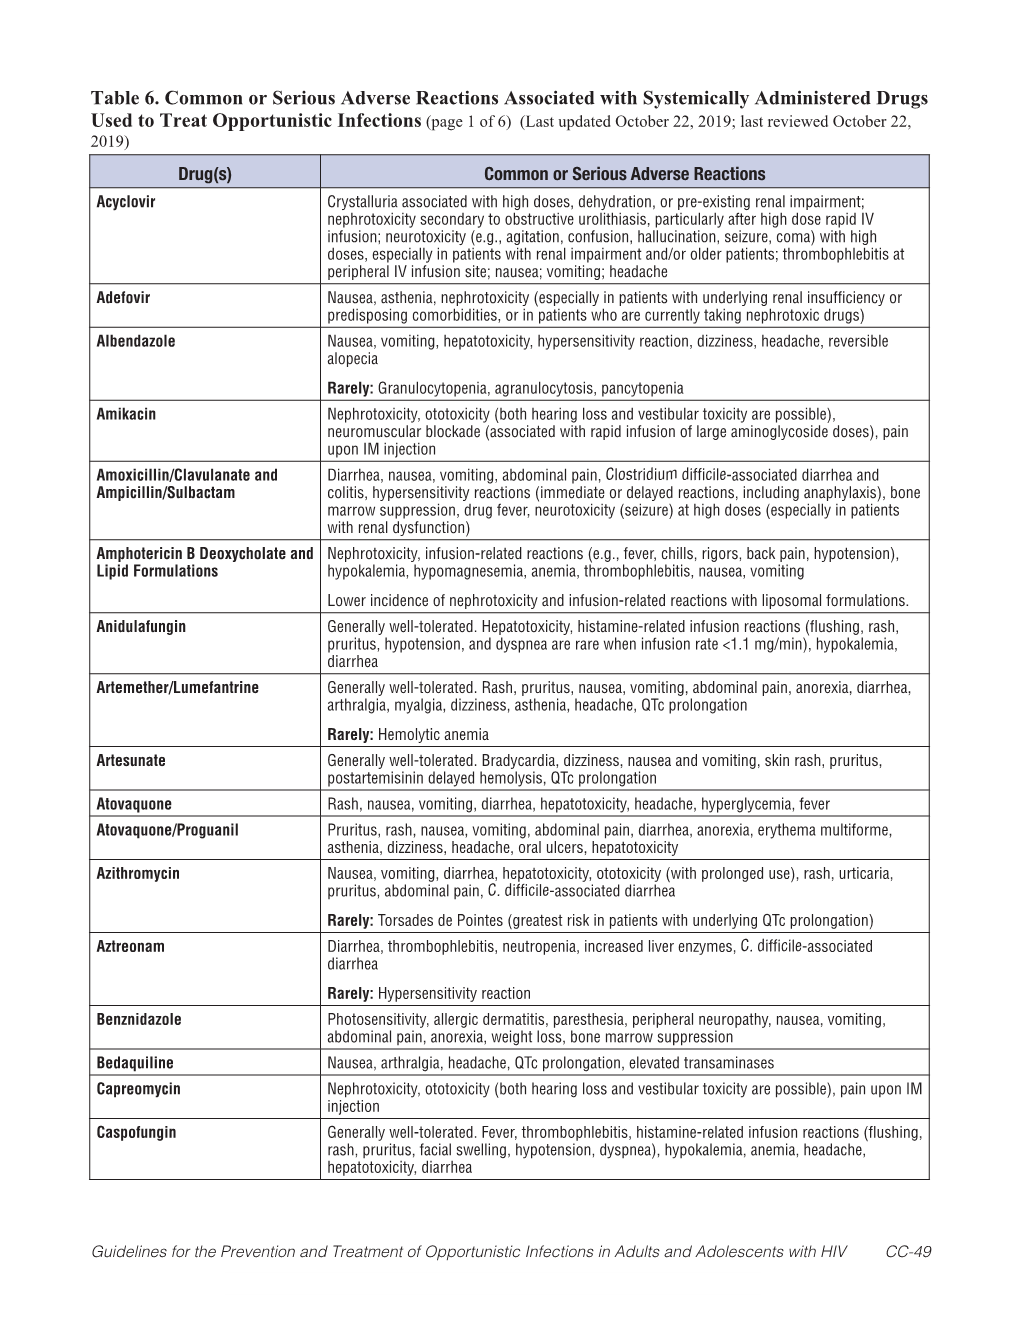 Table 6. Common Or Serious Adverse Reactions Associated with Systemically Administered Drugs